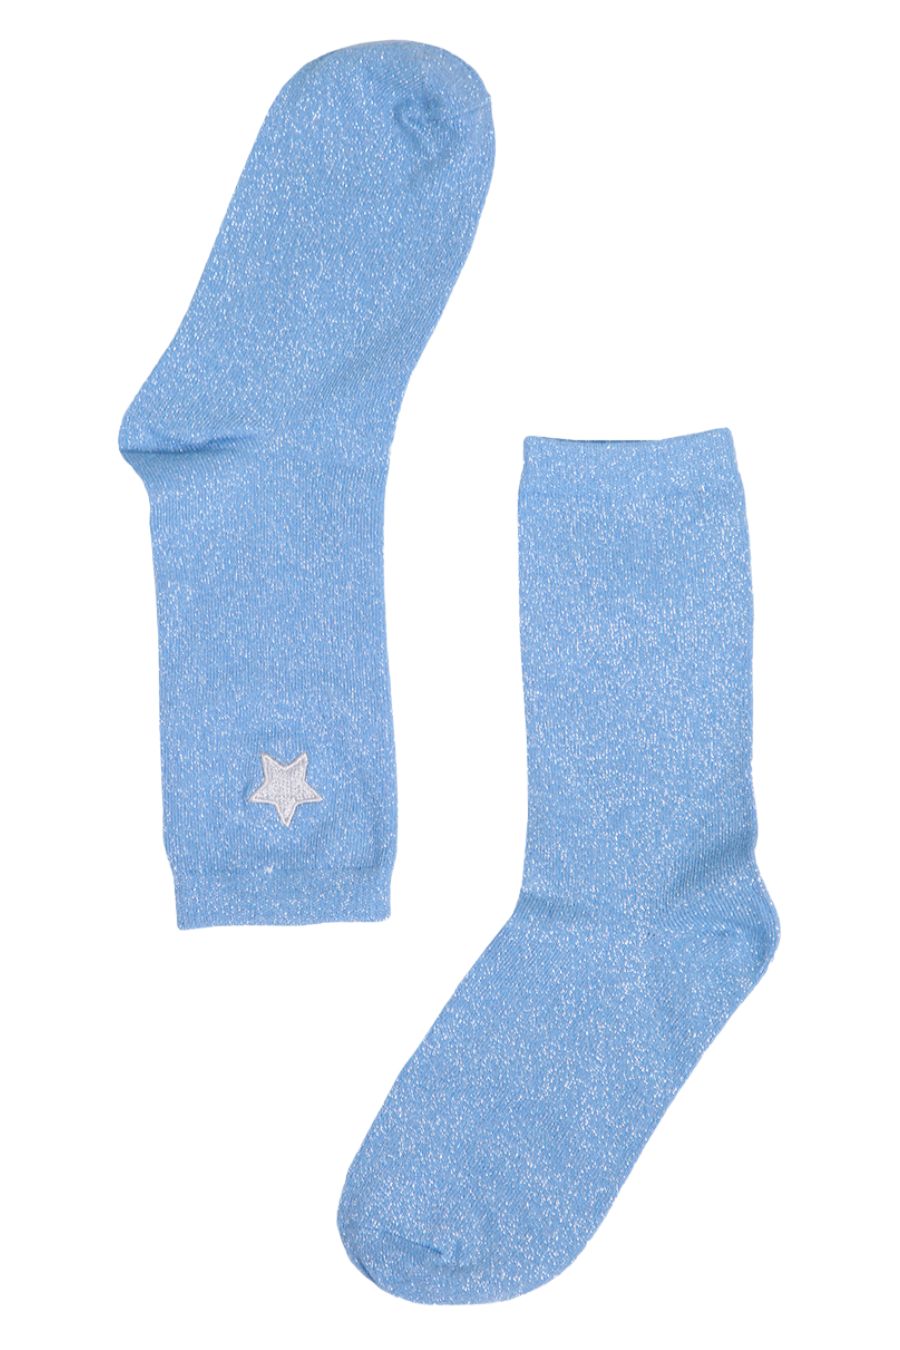 blue silver glitter socks with silver embroidered star